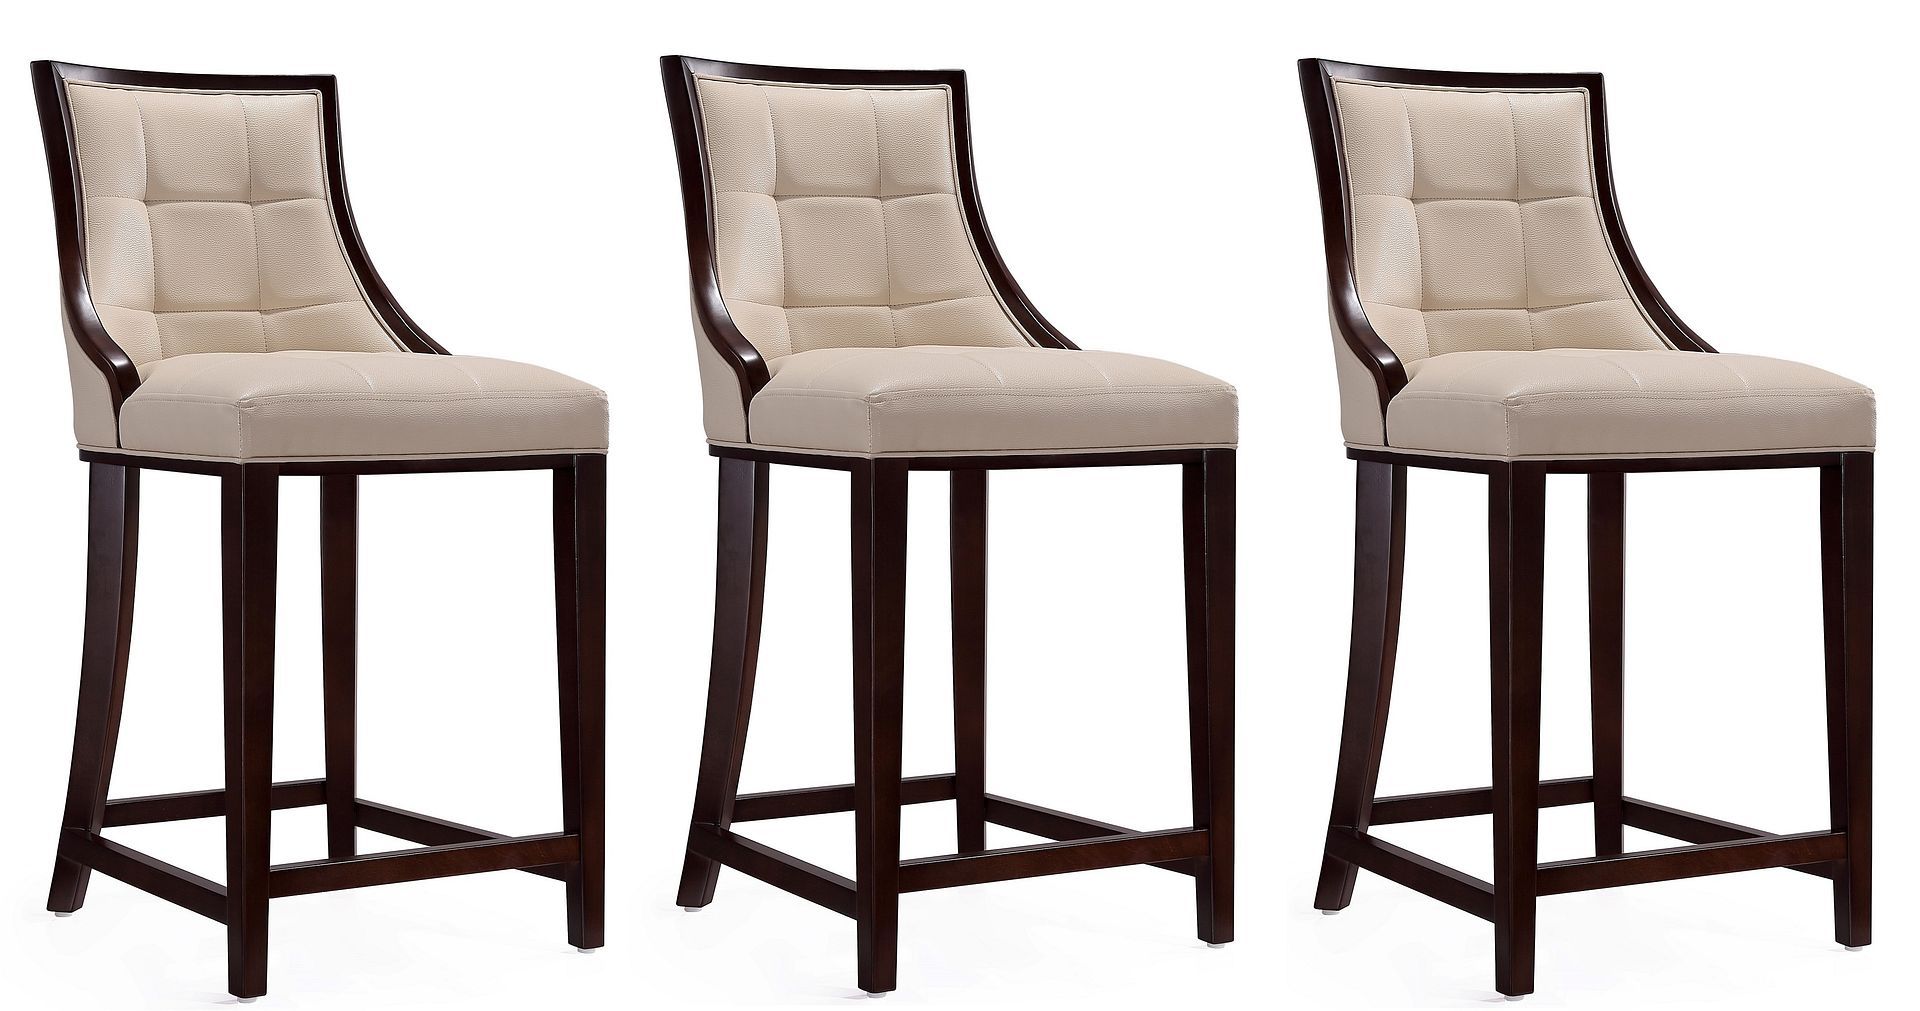 Fifth Avenue Counter Stool -Set of 3